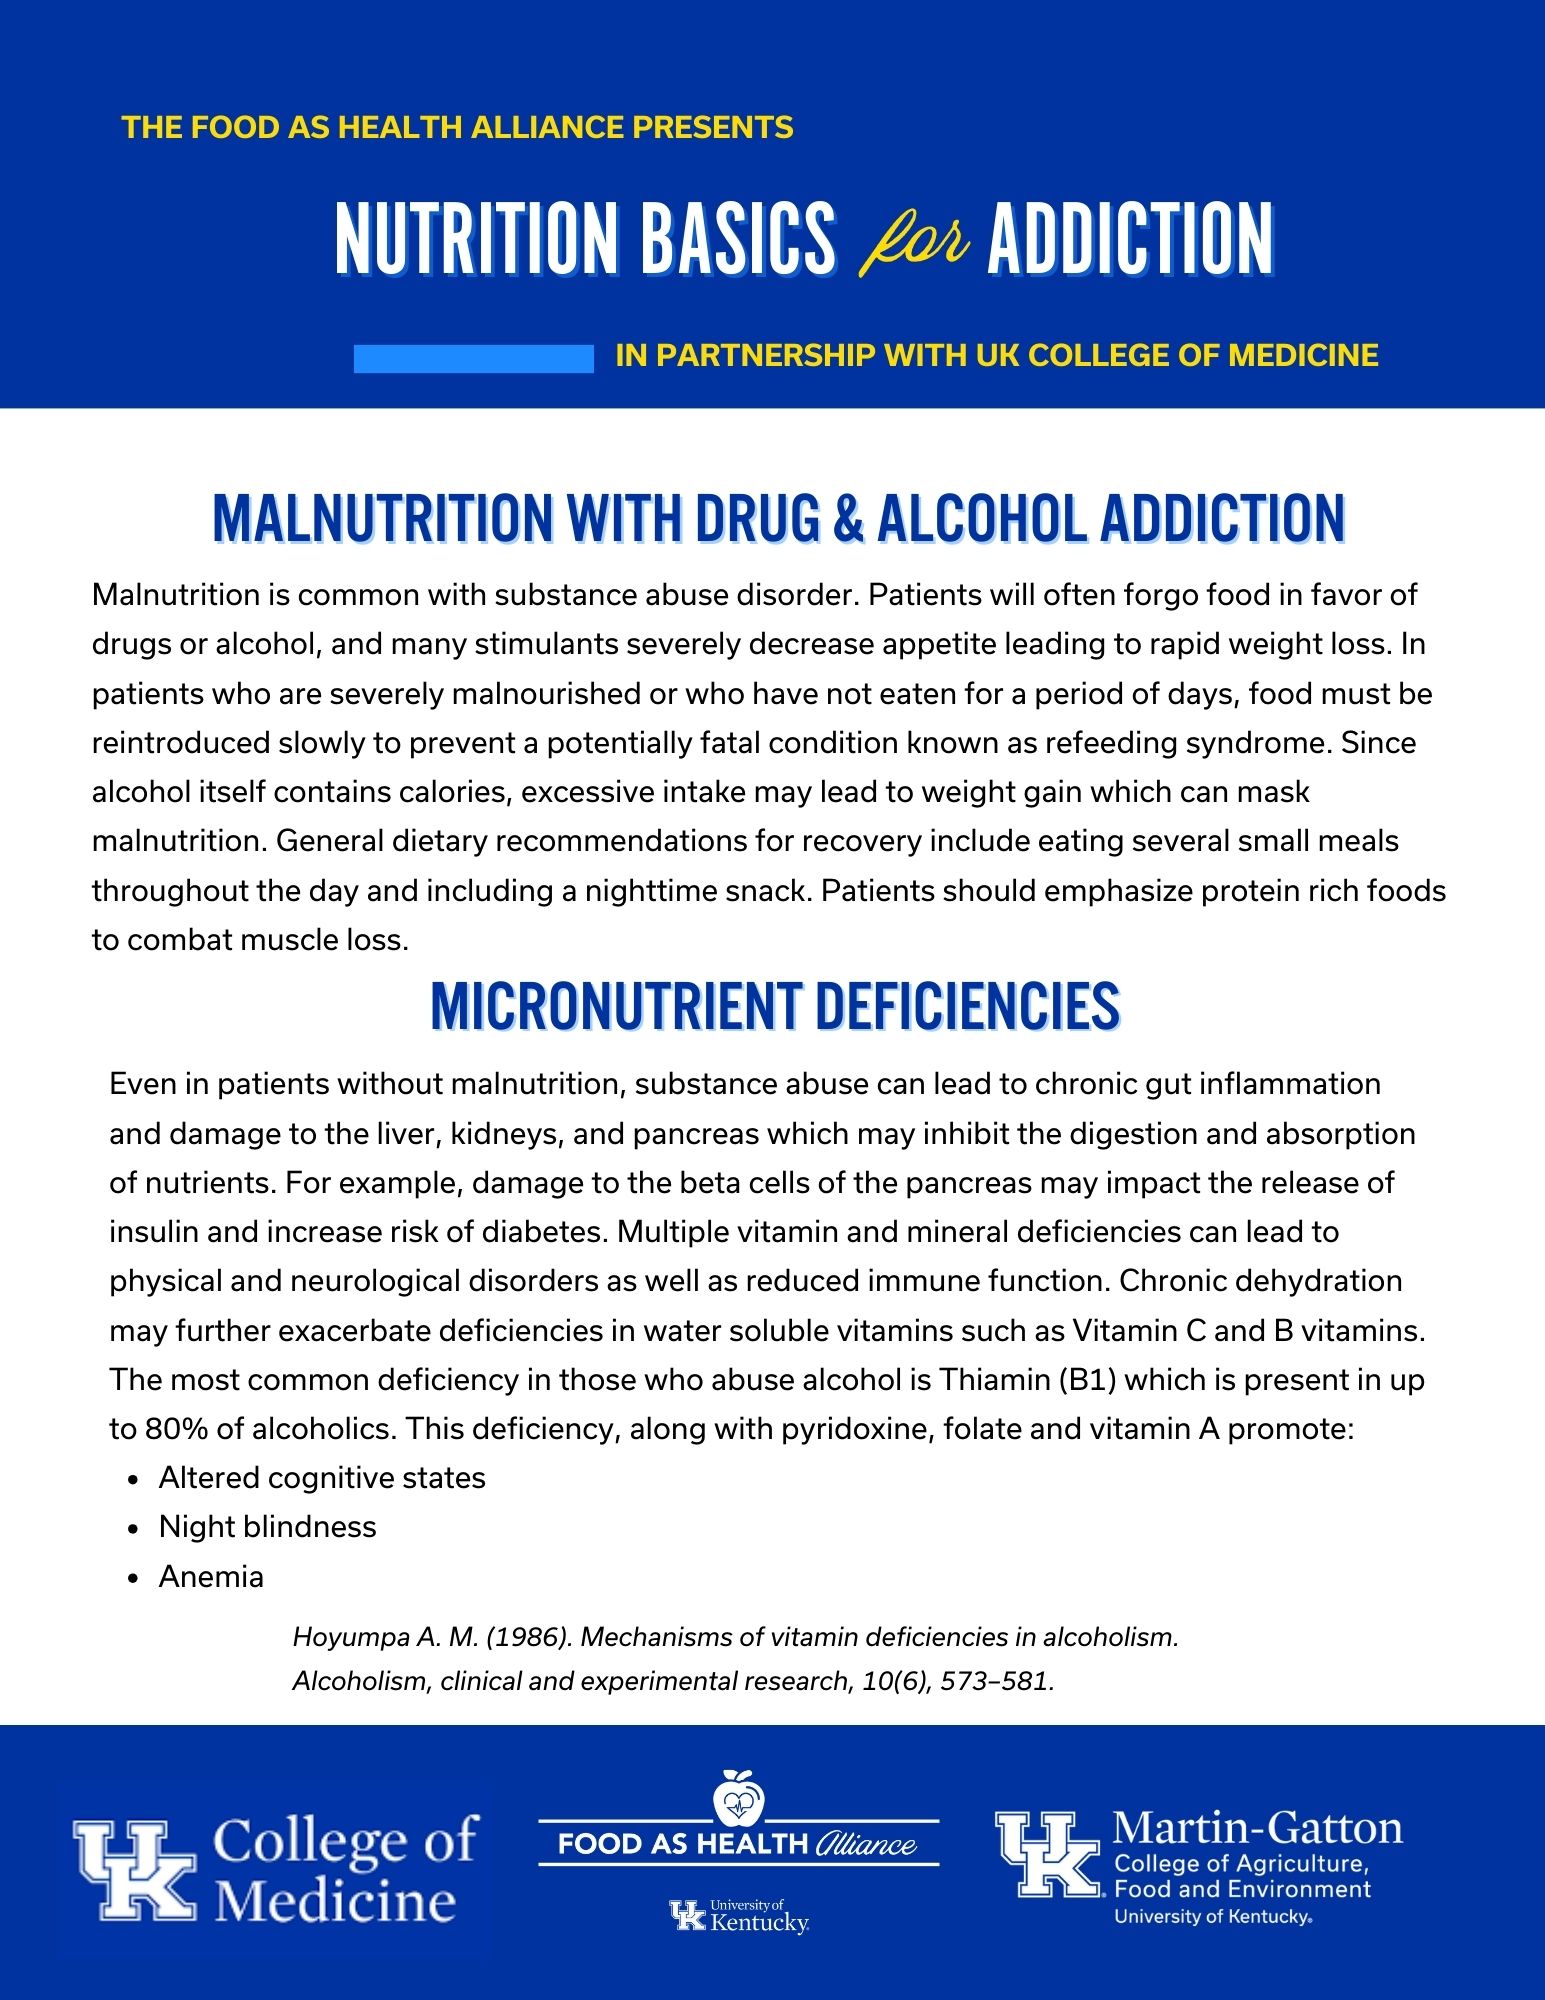 picture of handout about addiction